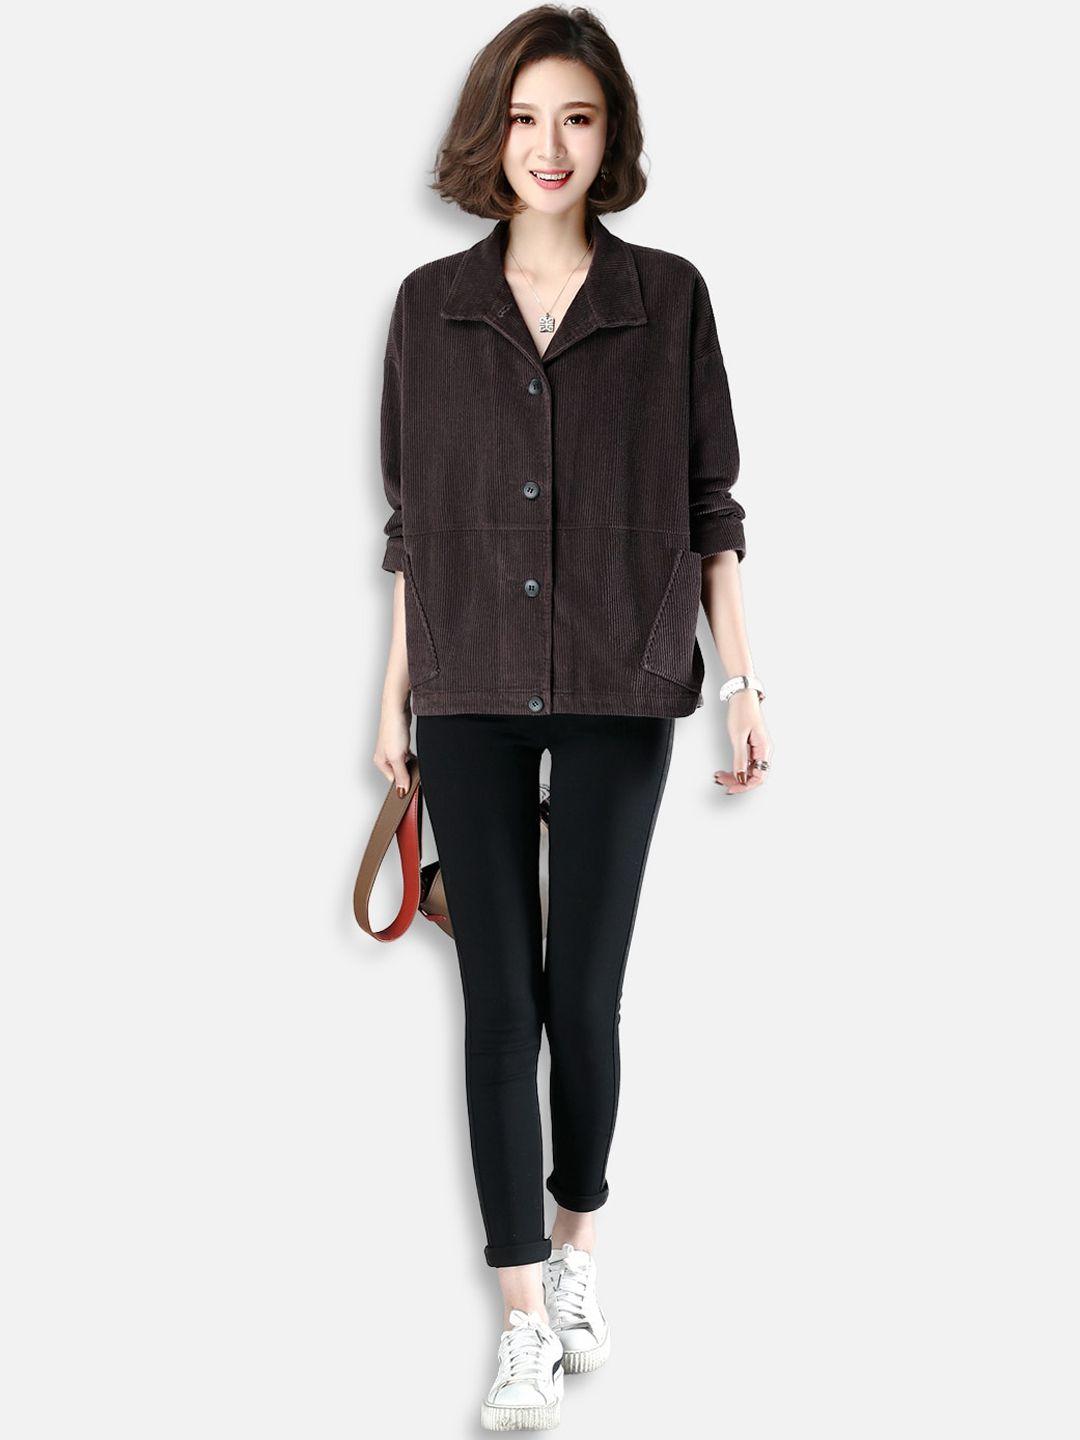 jc collection women coffee brown striped tailored jacket